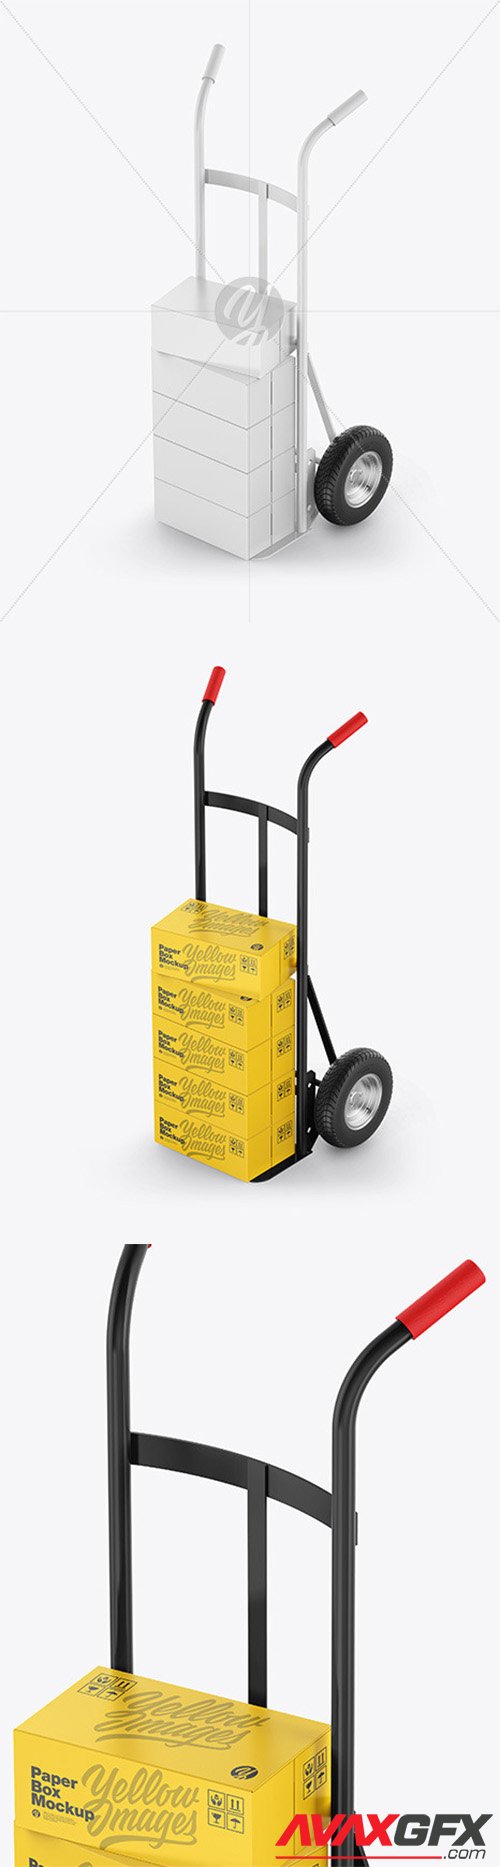 Hand Truck With Boxes Mockup 64329